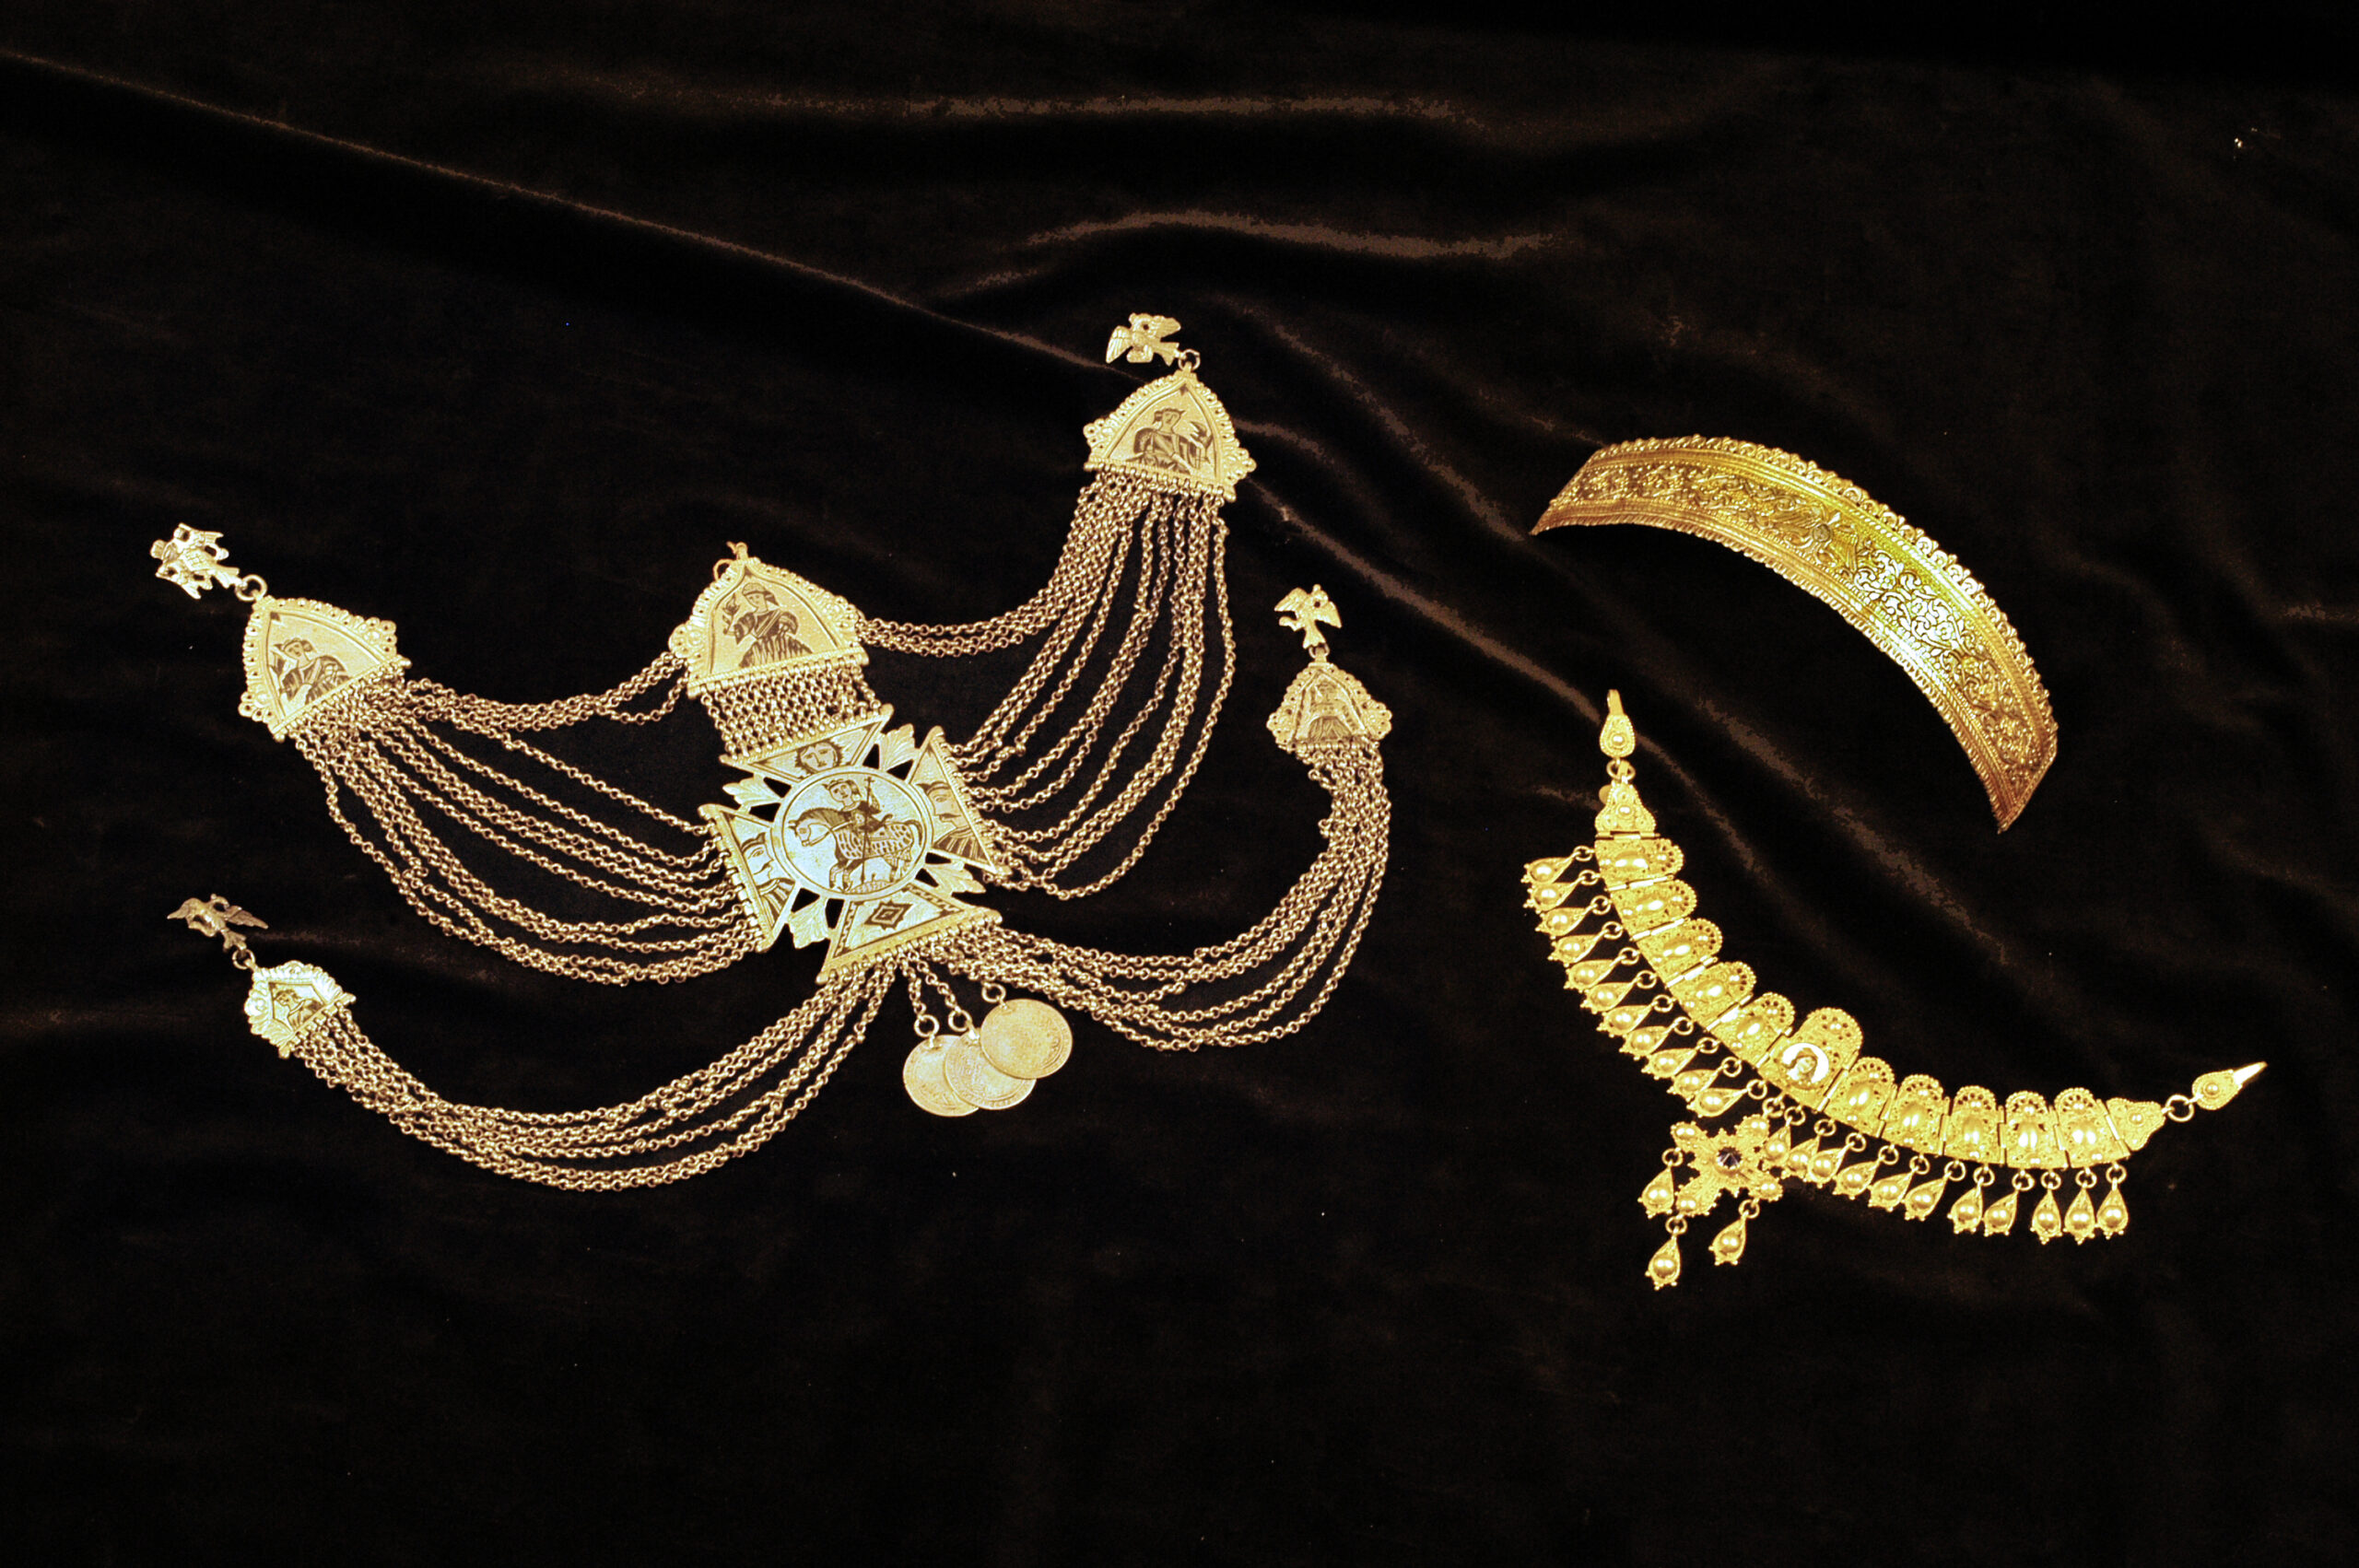 The Valuable Tradition. Jewelry, ornaments and amulets from the Collections of the Folklore Museum (A.U.Th.)